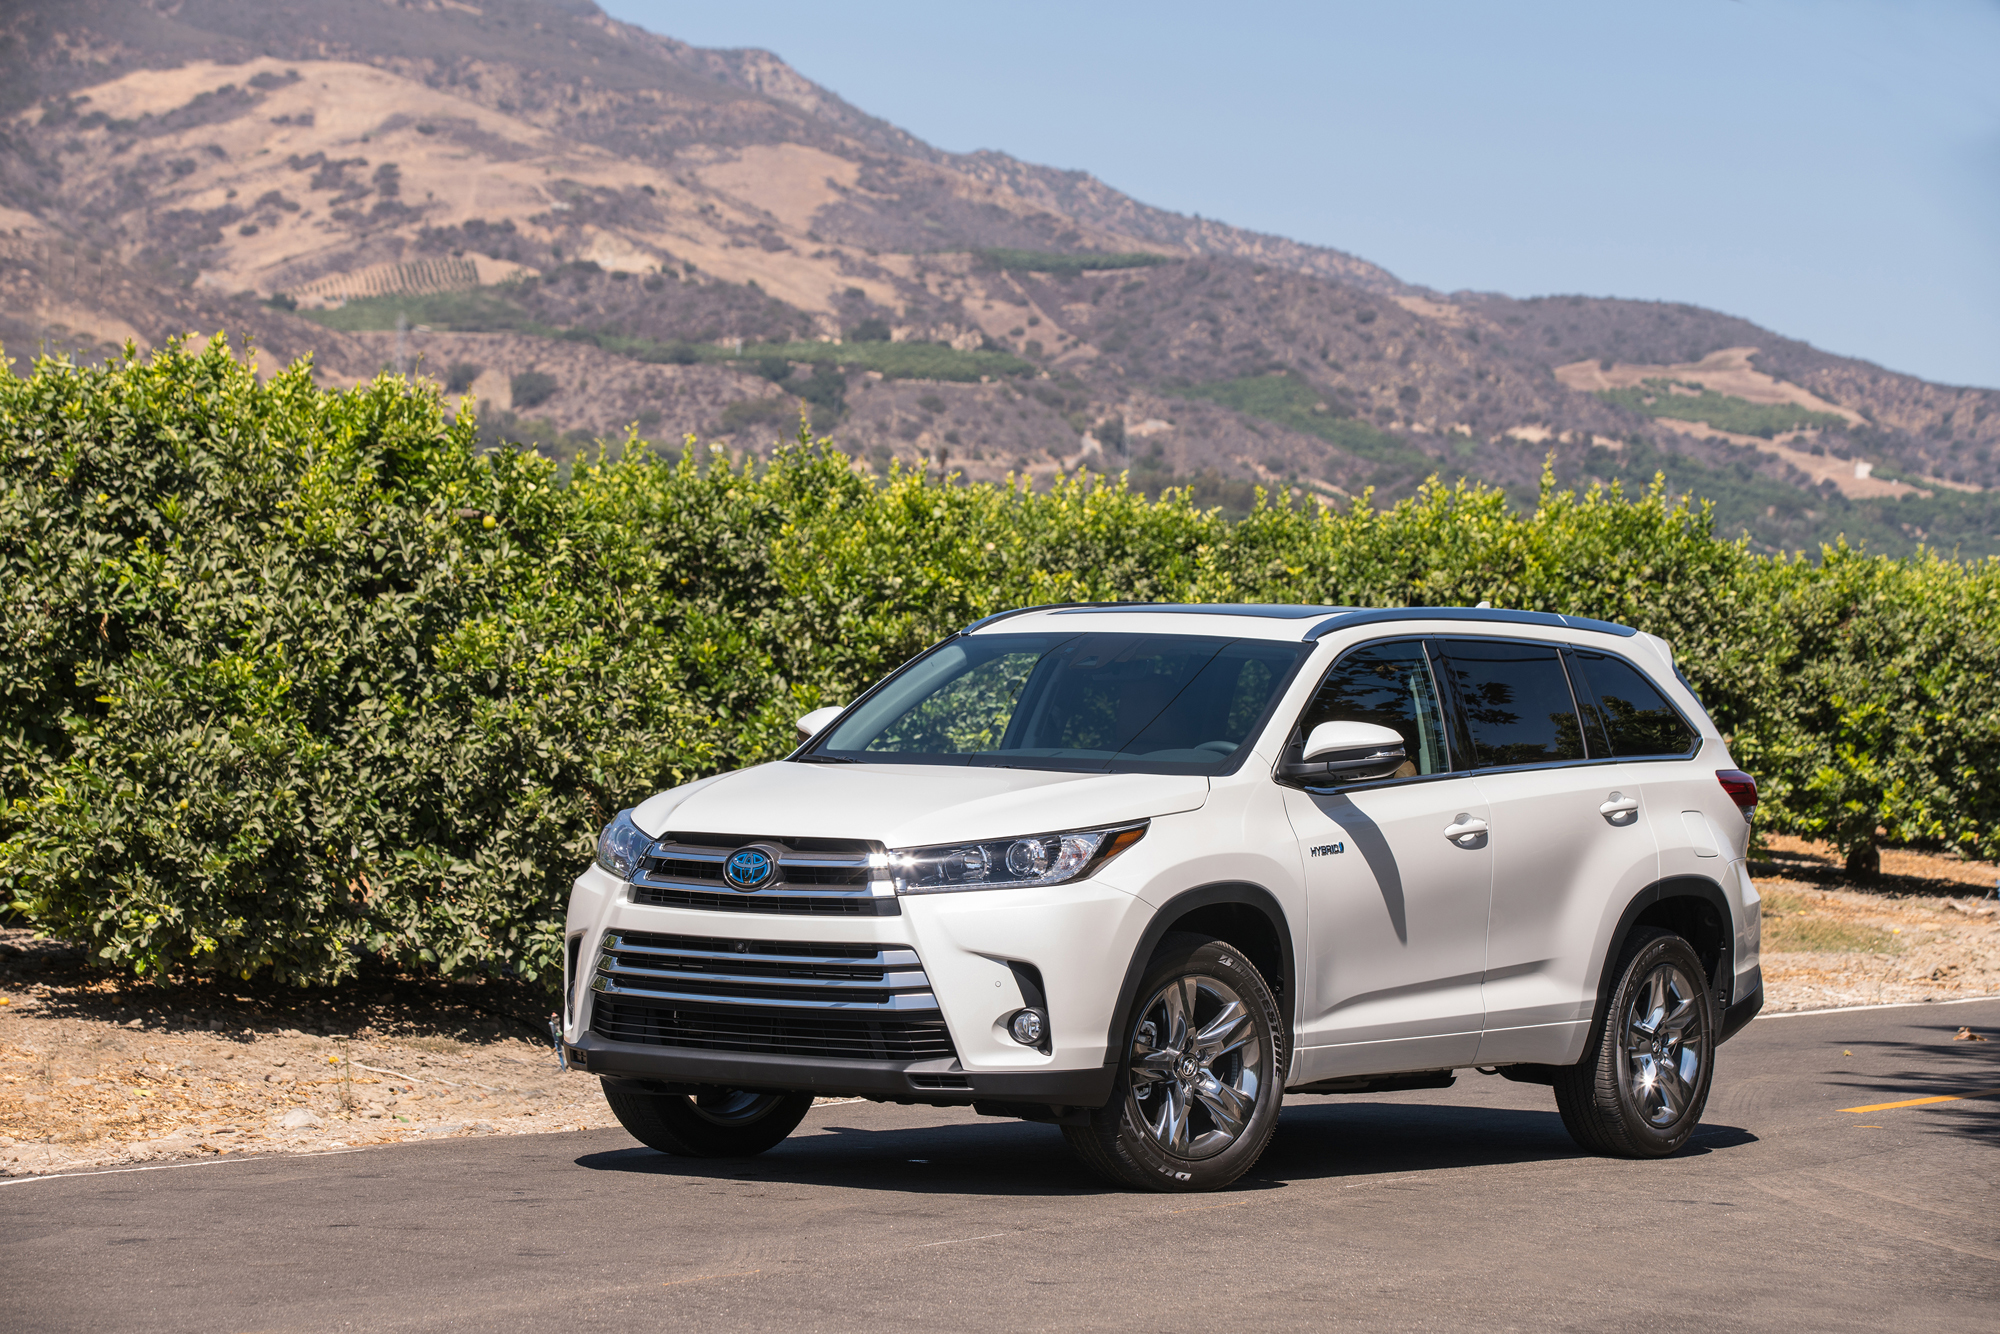 Toyota Highlander Wallpapers Images Photos Pictures ...